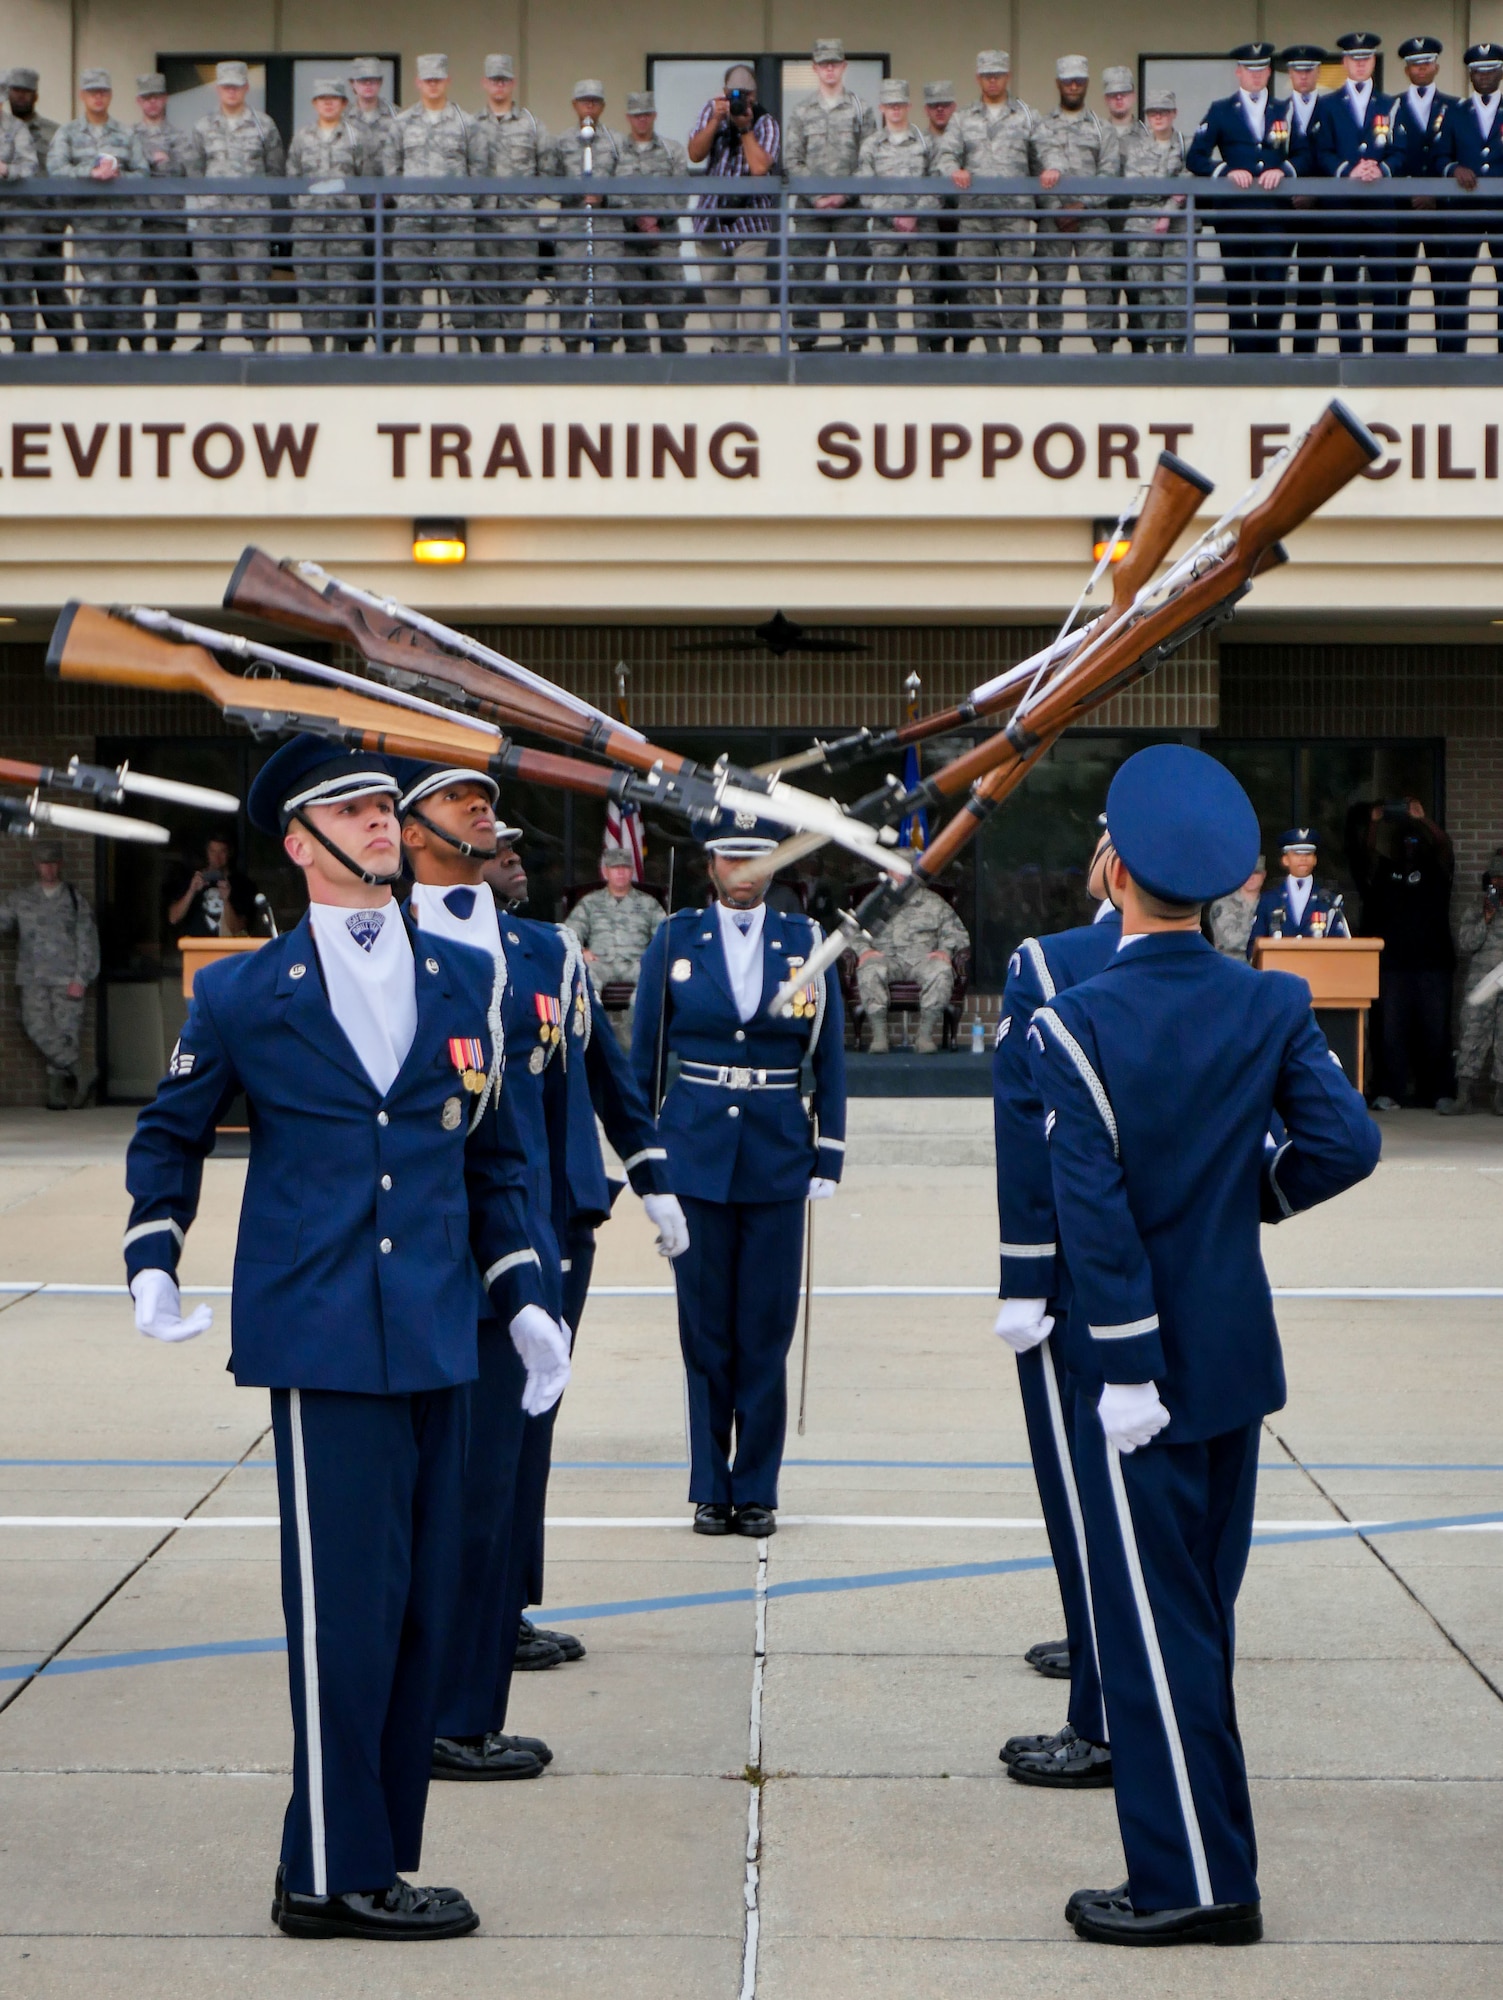 The U.S. Air Force Honor Guard Drill Team debutes their 2017 routine during the 81st Training Group drill down at the Levitow Training Support Facility drill pad March 10, 2017, on Keesler Air Force Base, Miss. The team comes to Keesler every year for five weeks to develop a new routine that they will use throughout the year. (U.S. Air Force photo by Capt. David J. Murphy)